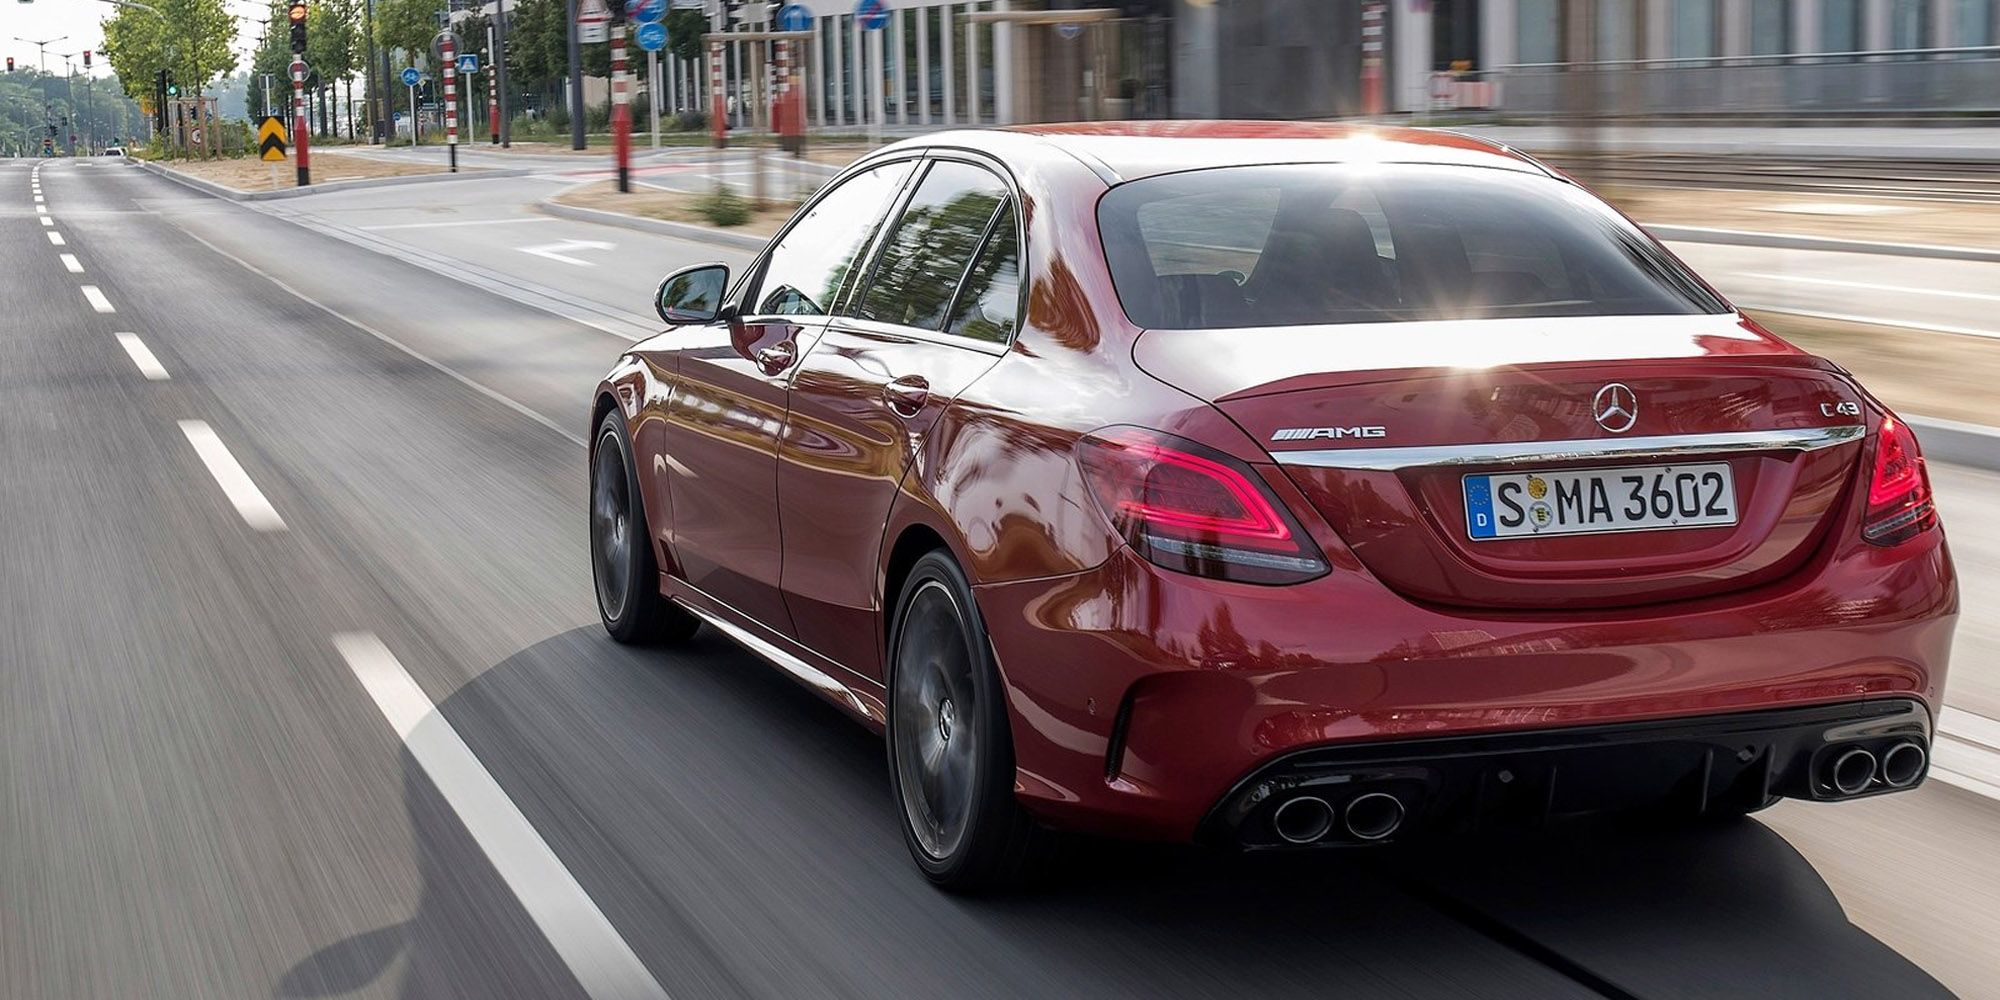 The rear of a red C43 AMG on the move